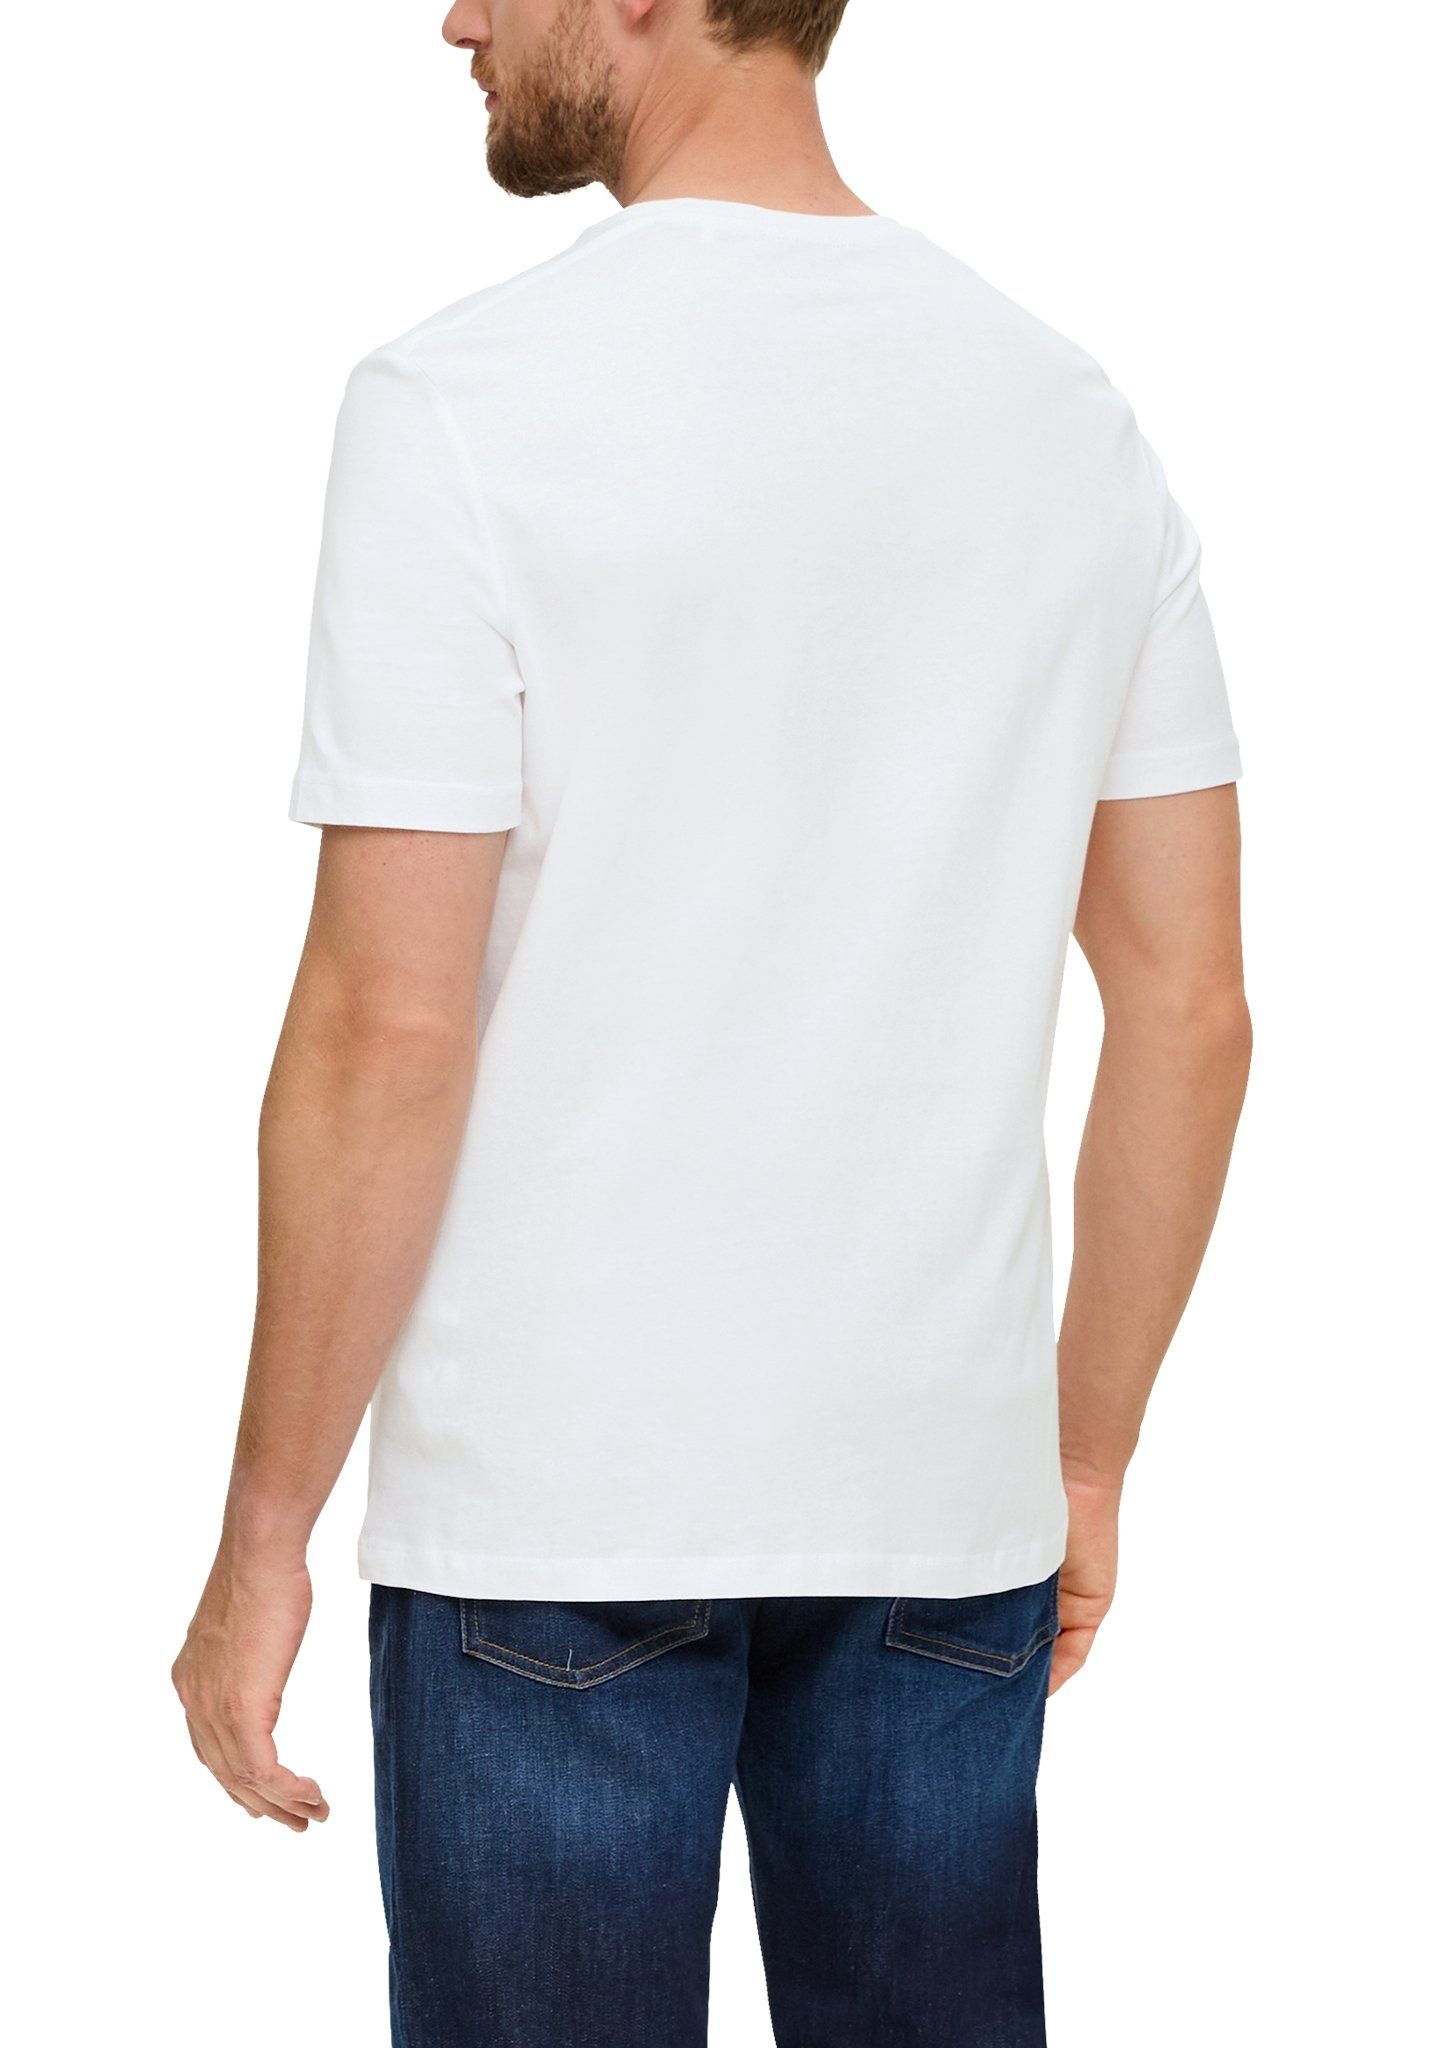 s.Oliver T-Shirt im white Look sportiven